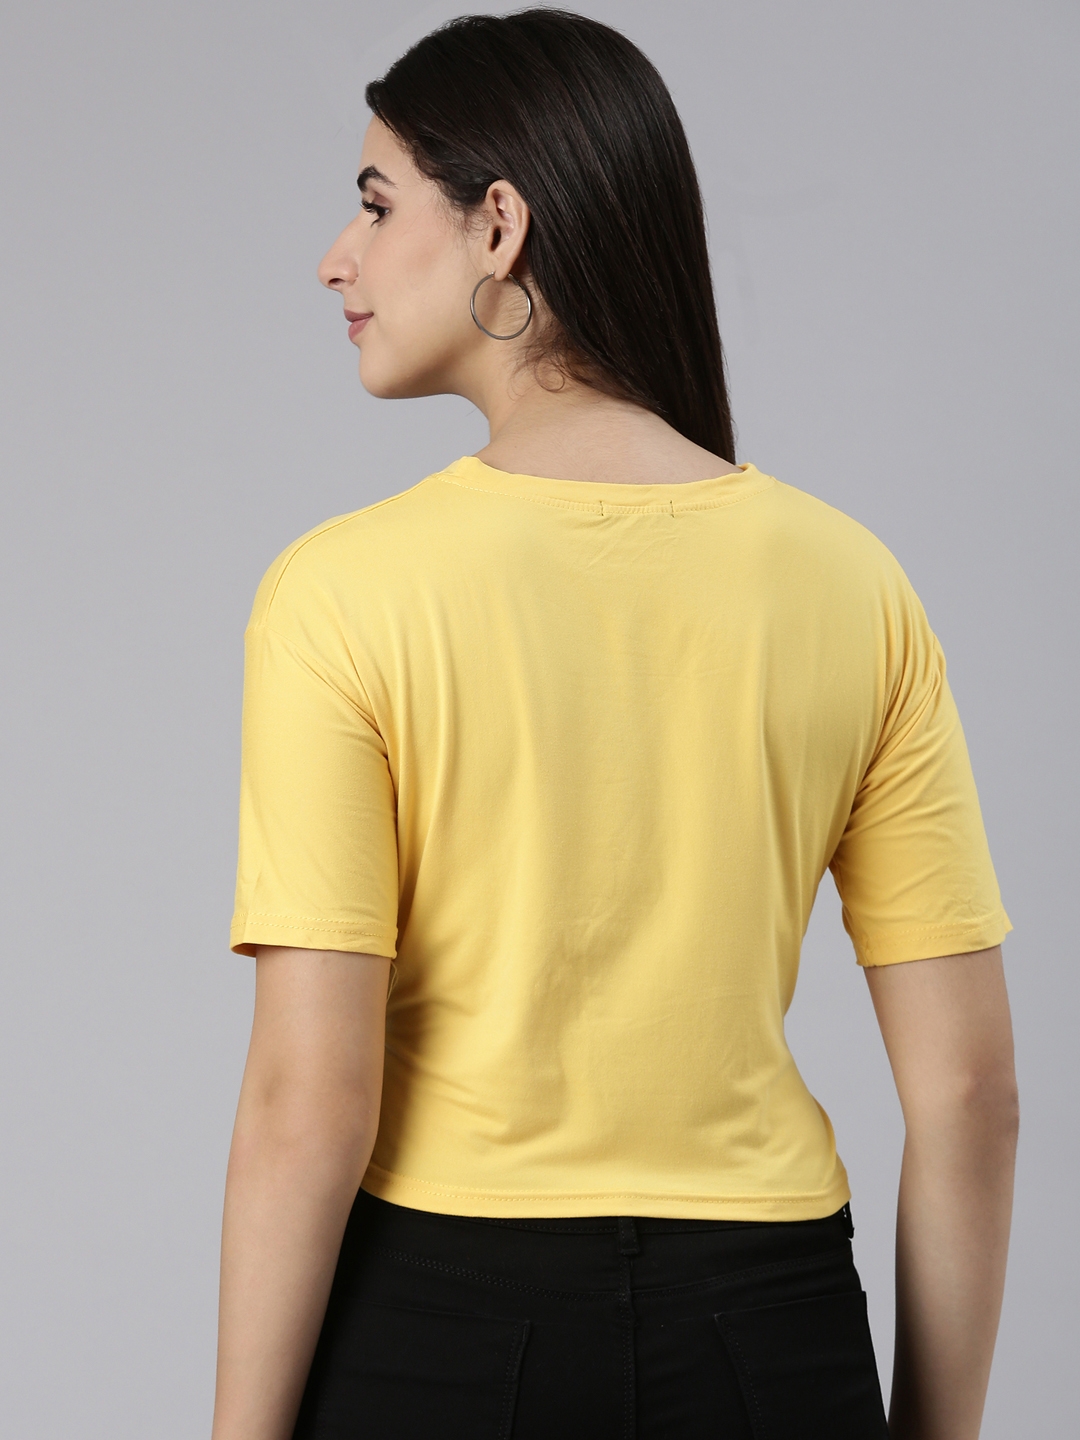 Showoff | SHOWOFF Women's Round Neck Printed Yellow Cinched Waist Crop Top 4